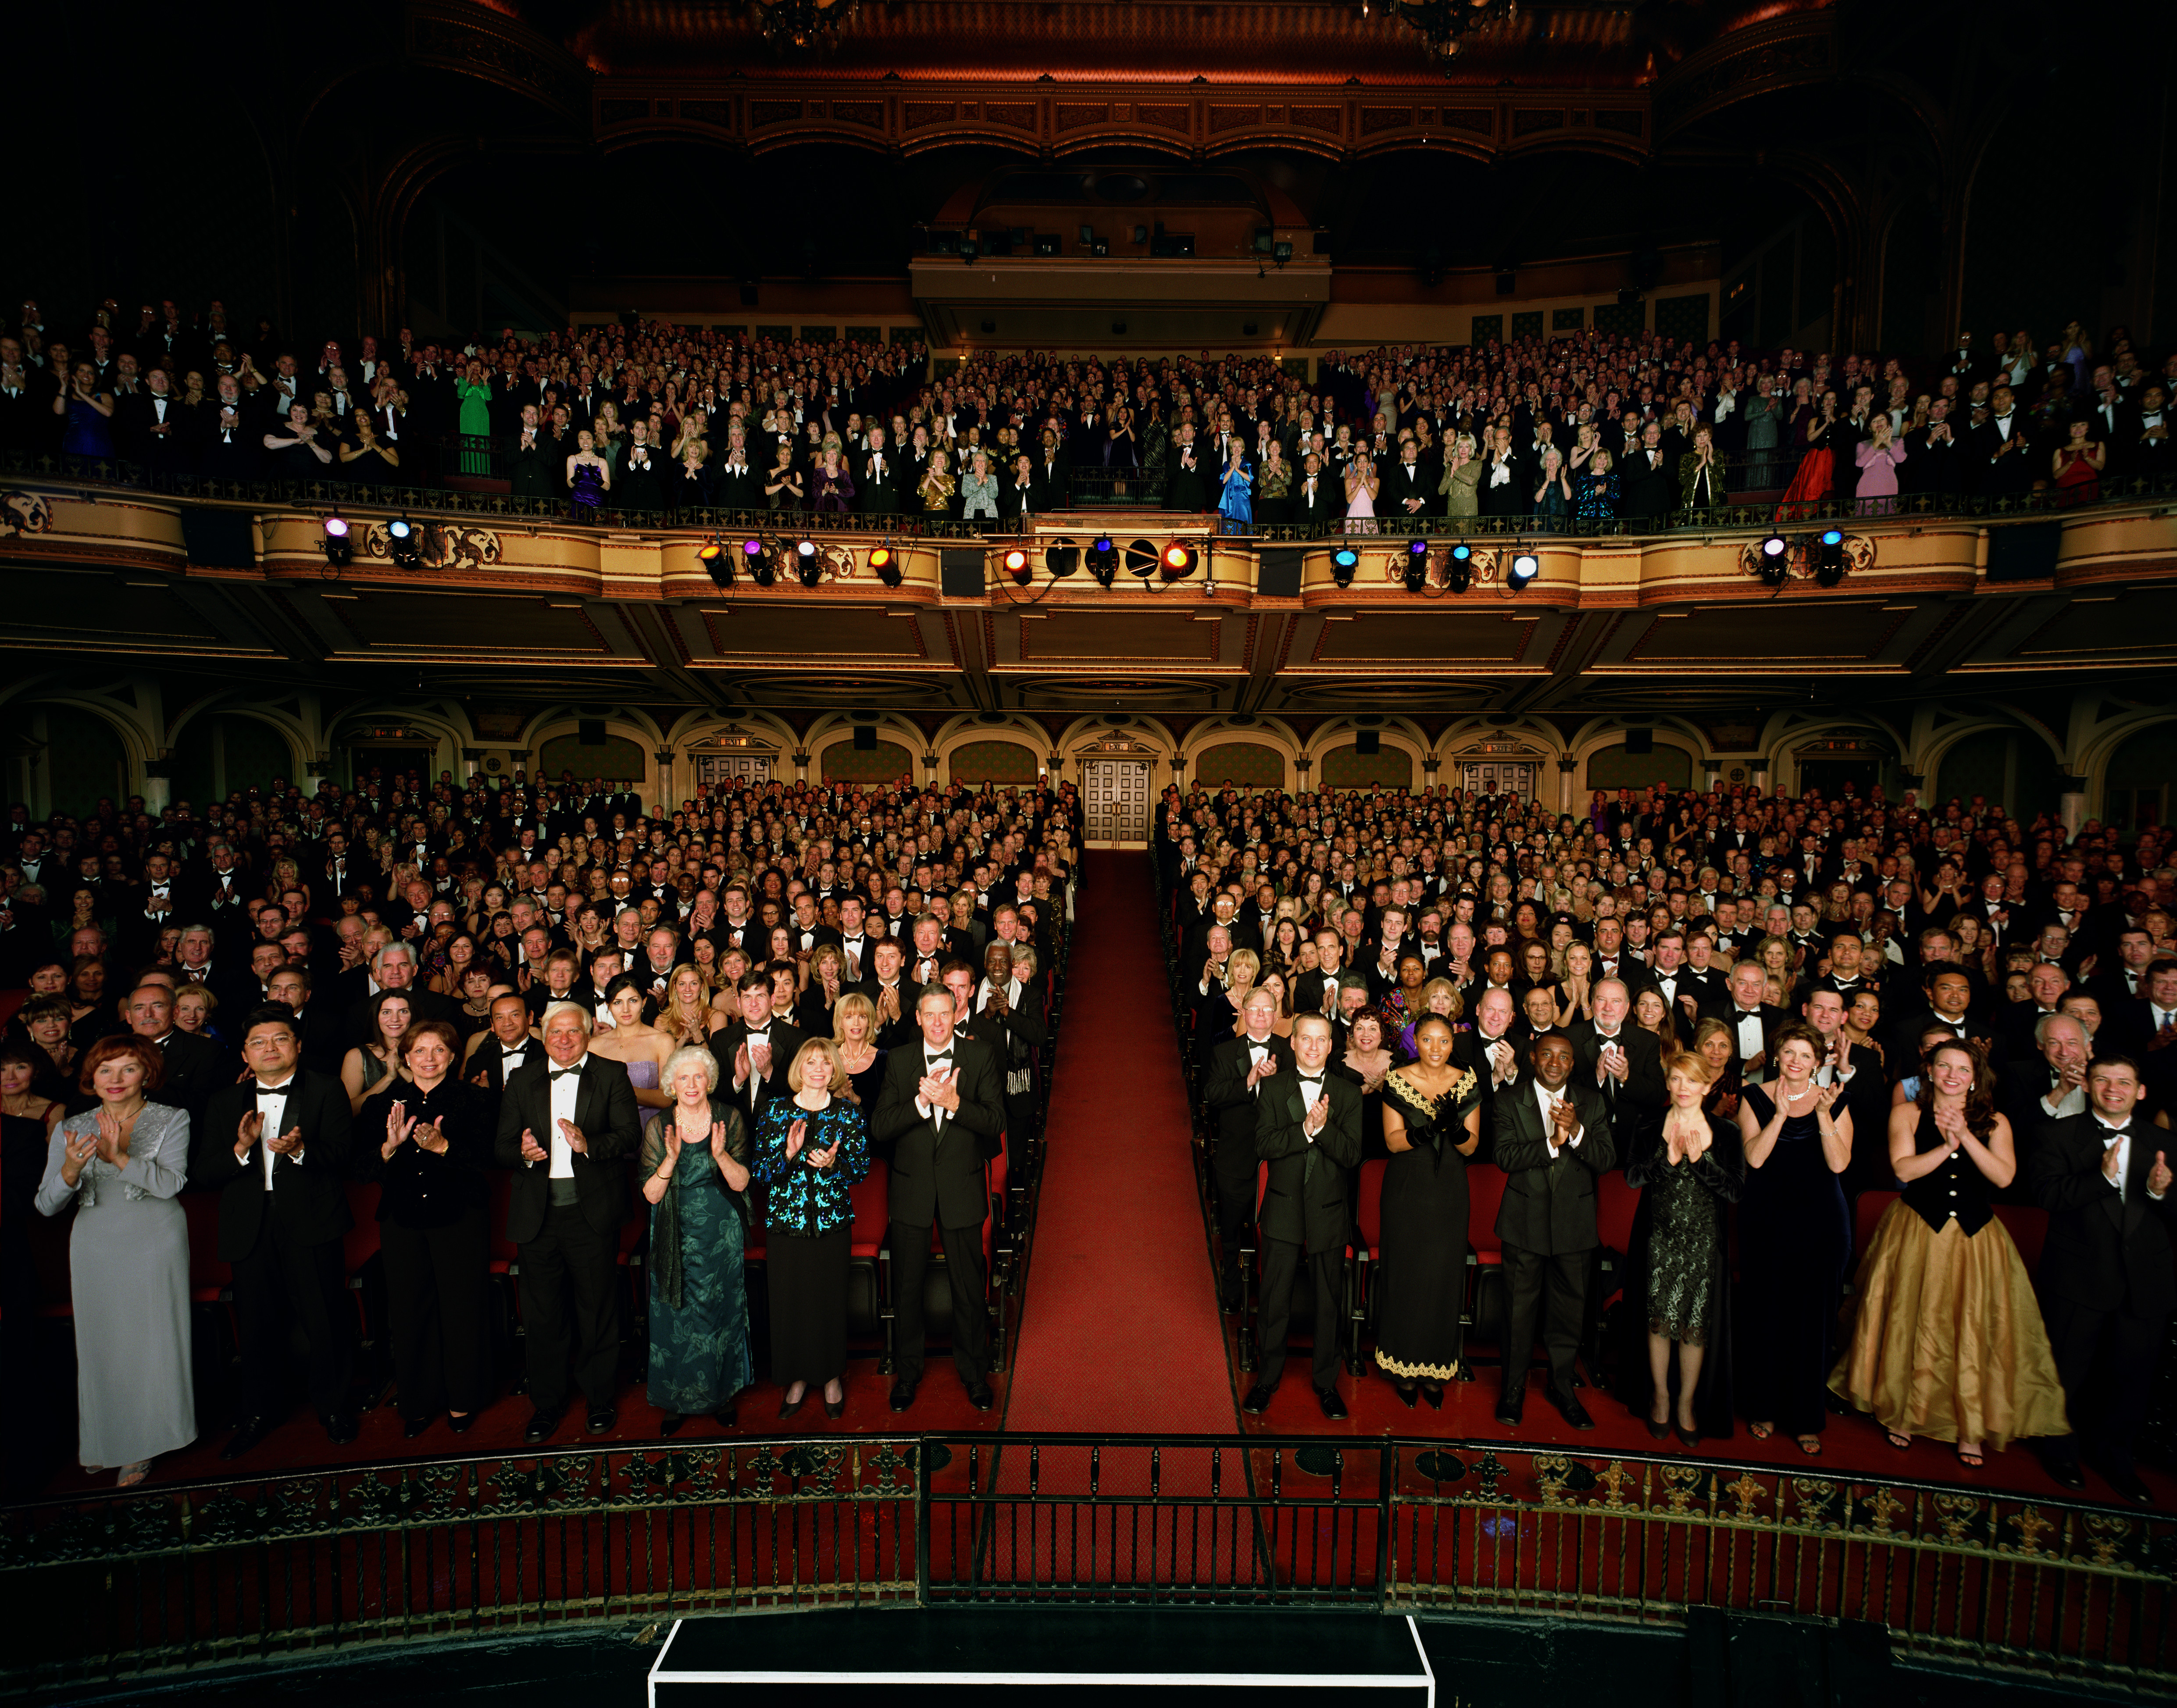 A crowd in a theater gives a standing ovation